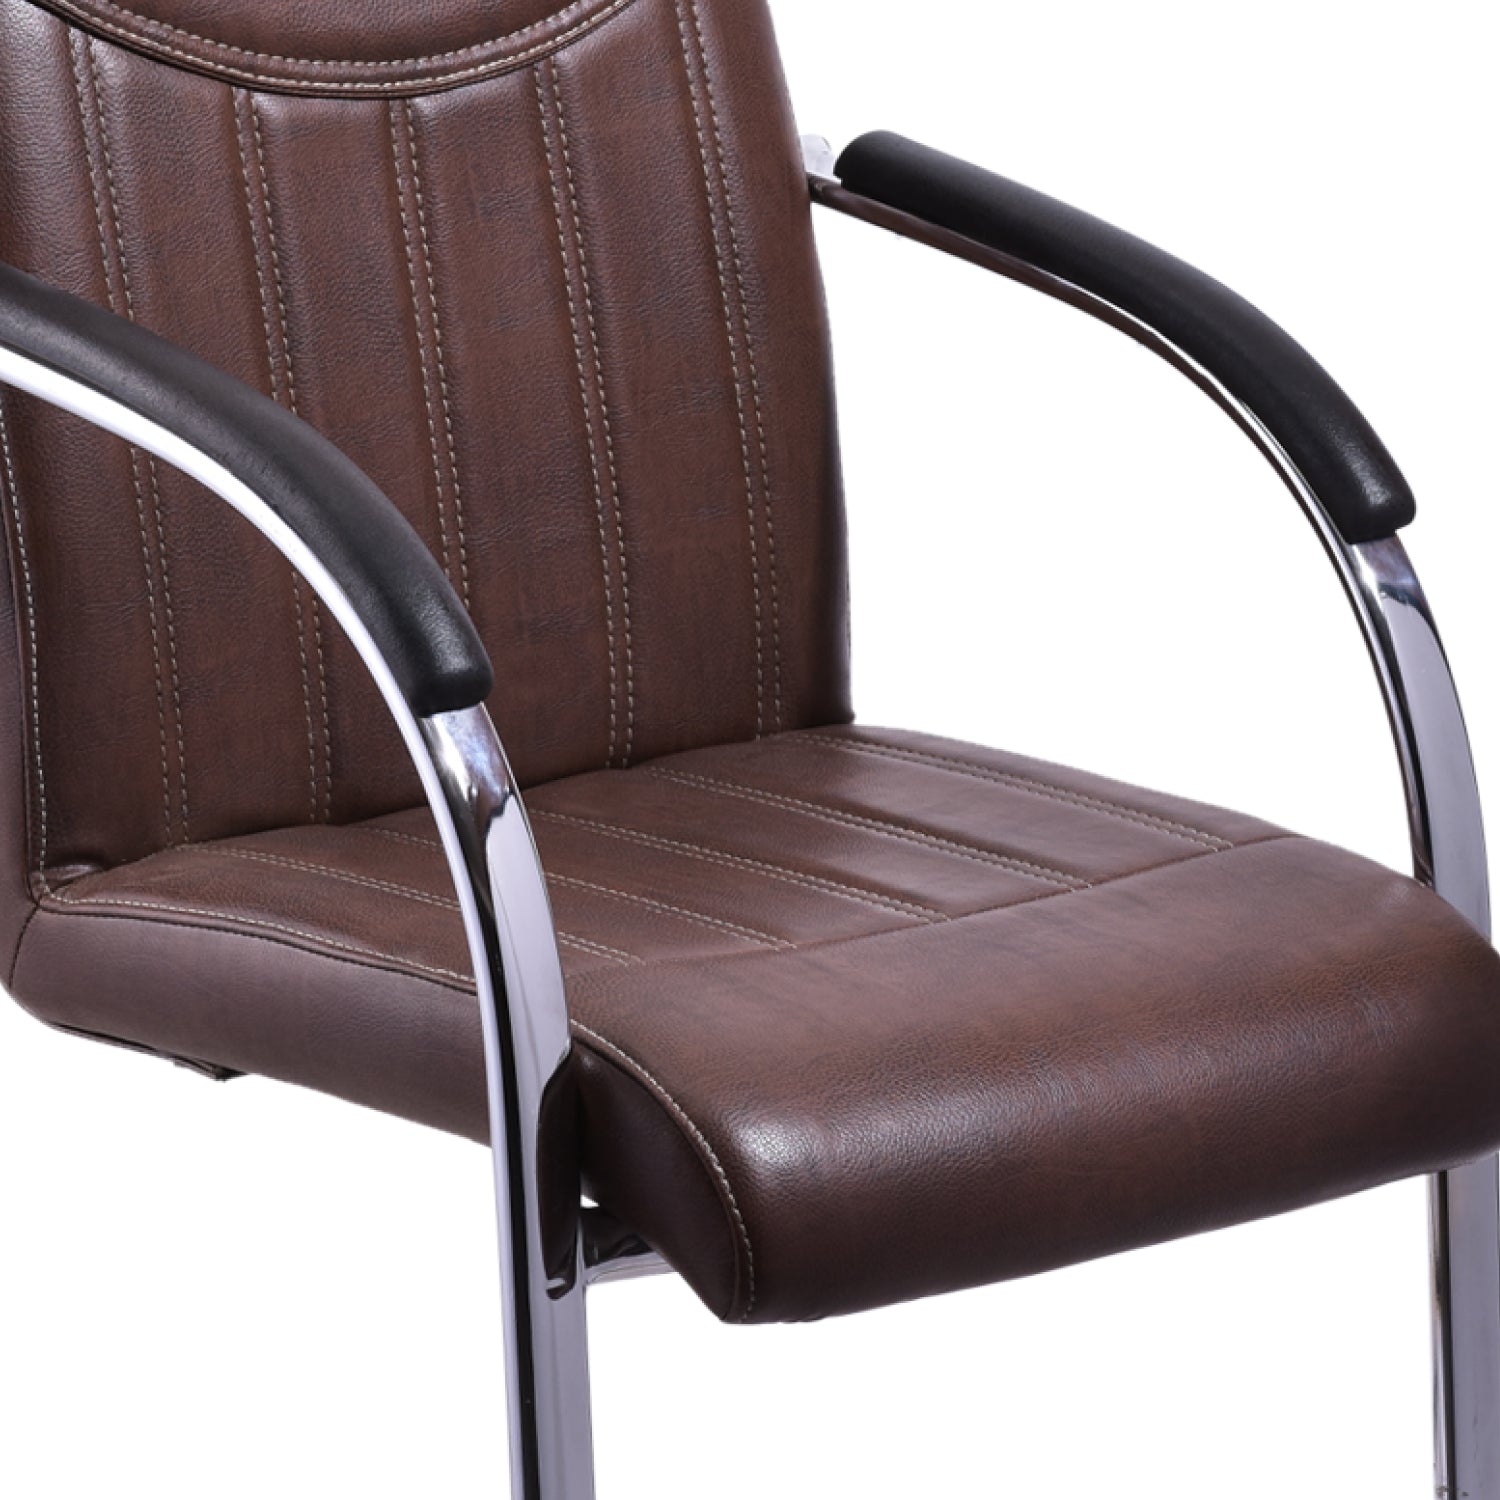 ZSV1059 Medium Back Chair by Zorin in Brown Color Zorin